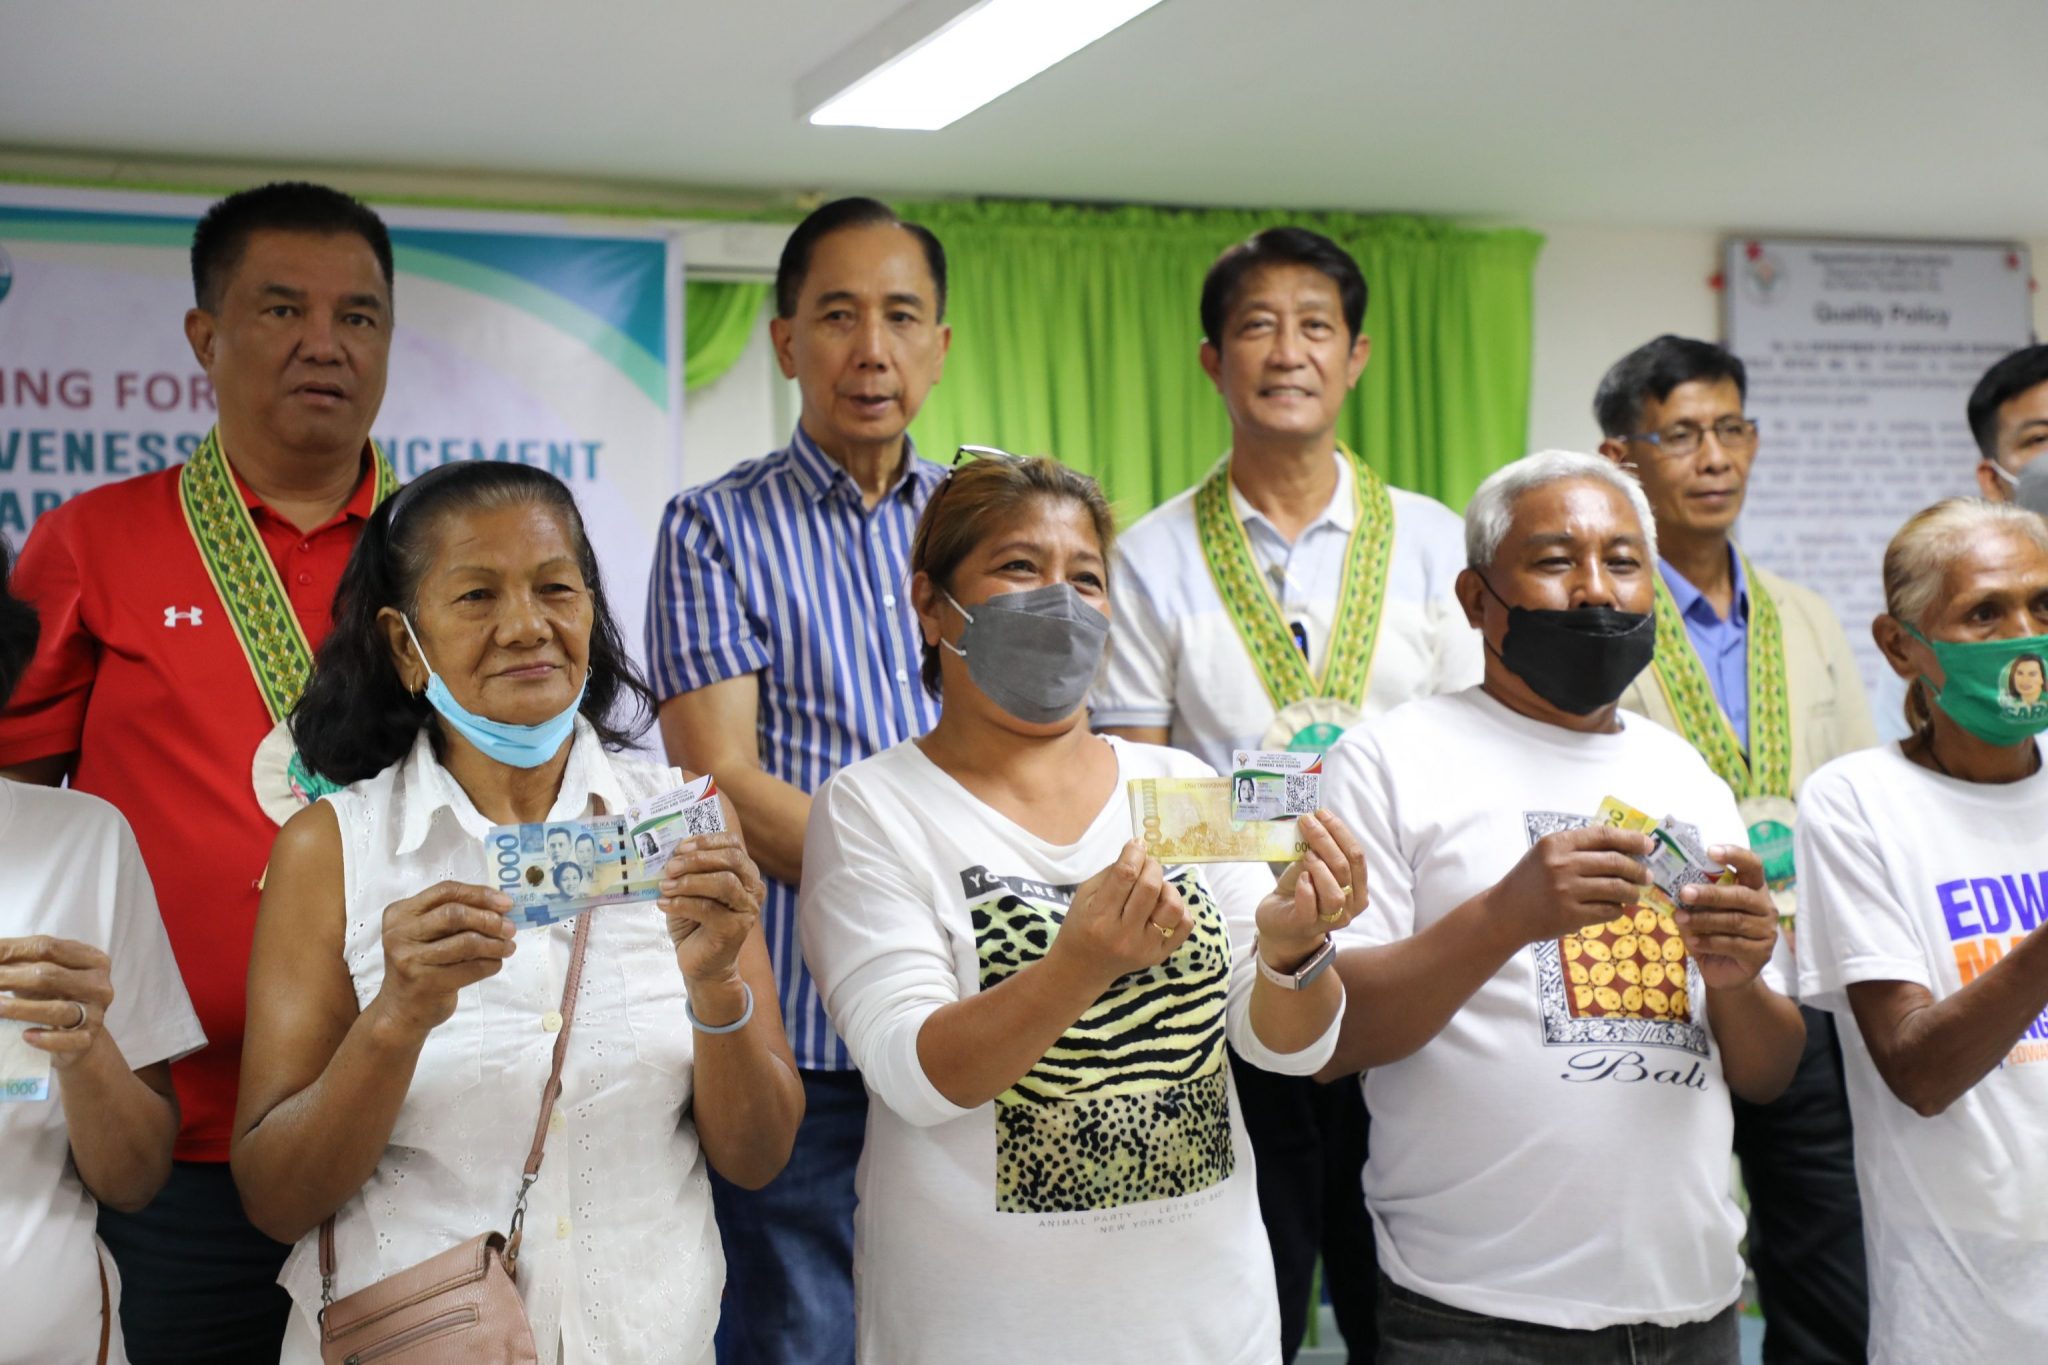 Cagayanon farmers and fishers receive P388M support from agri dep’t